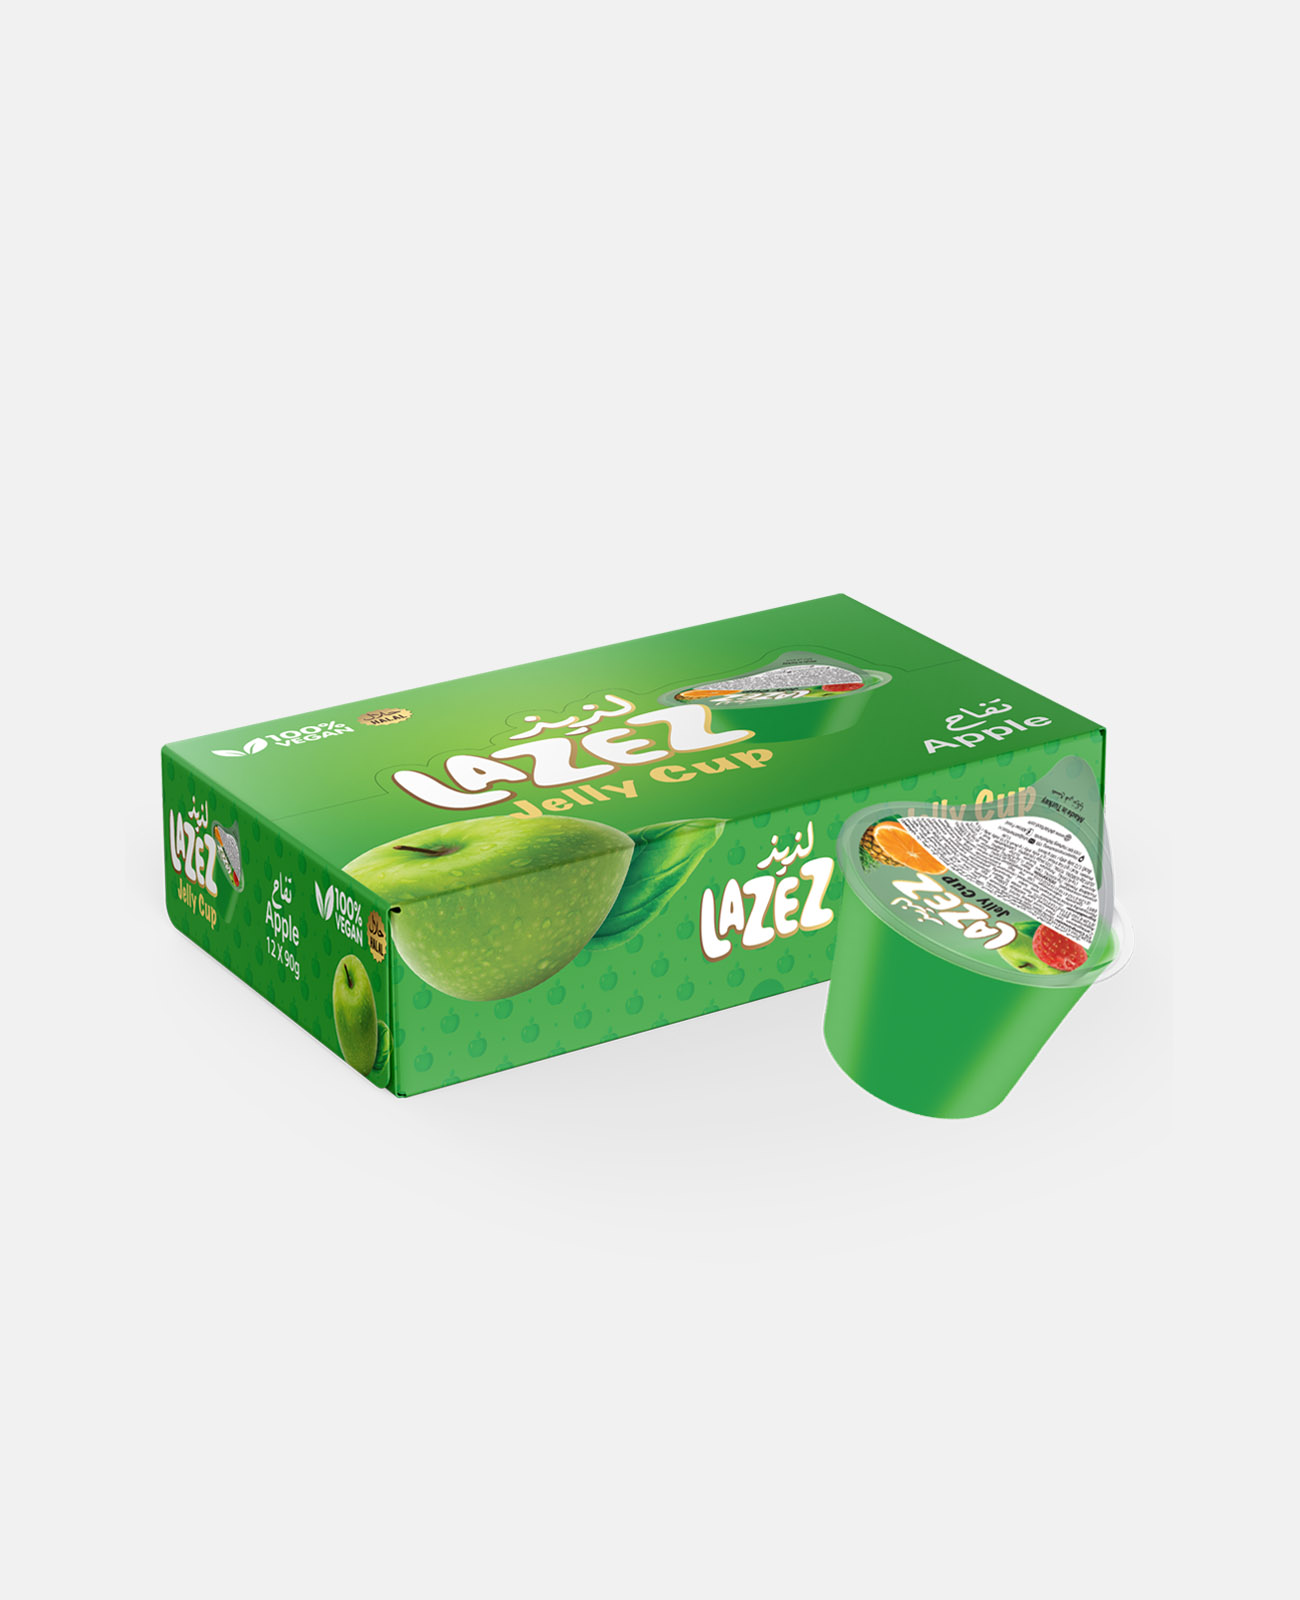 Lazez Jelly Cup/Green Apple